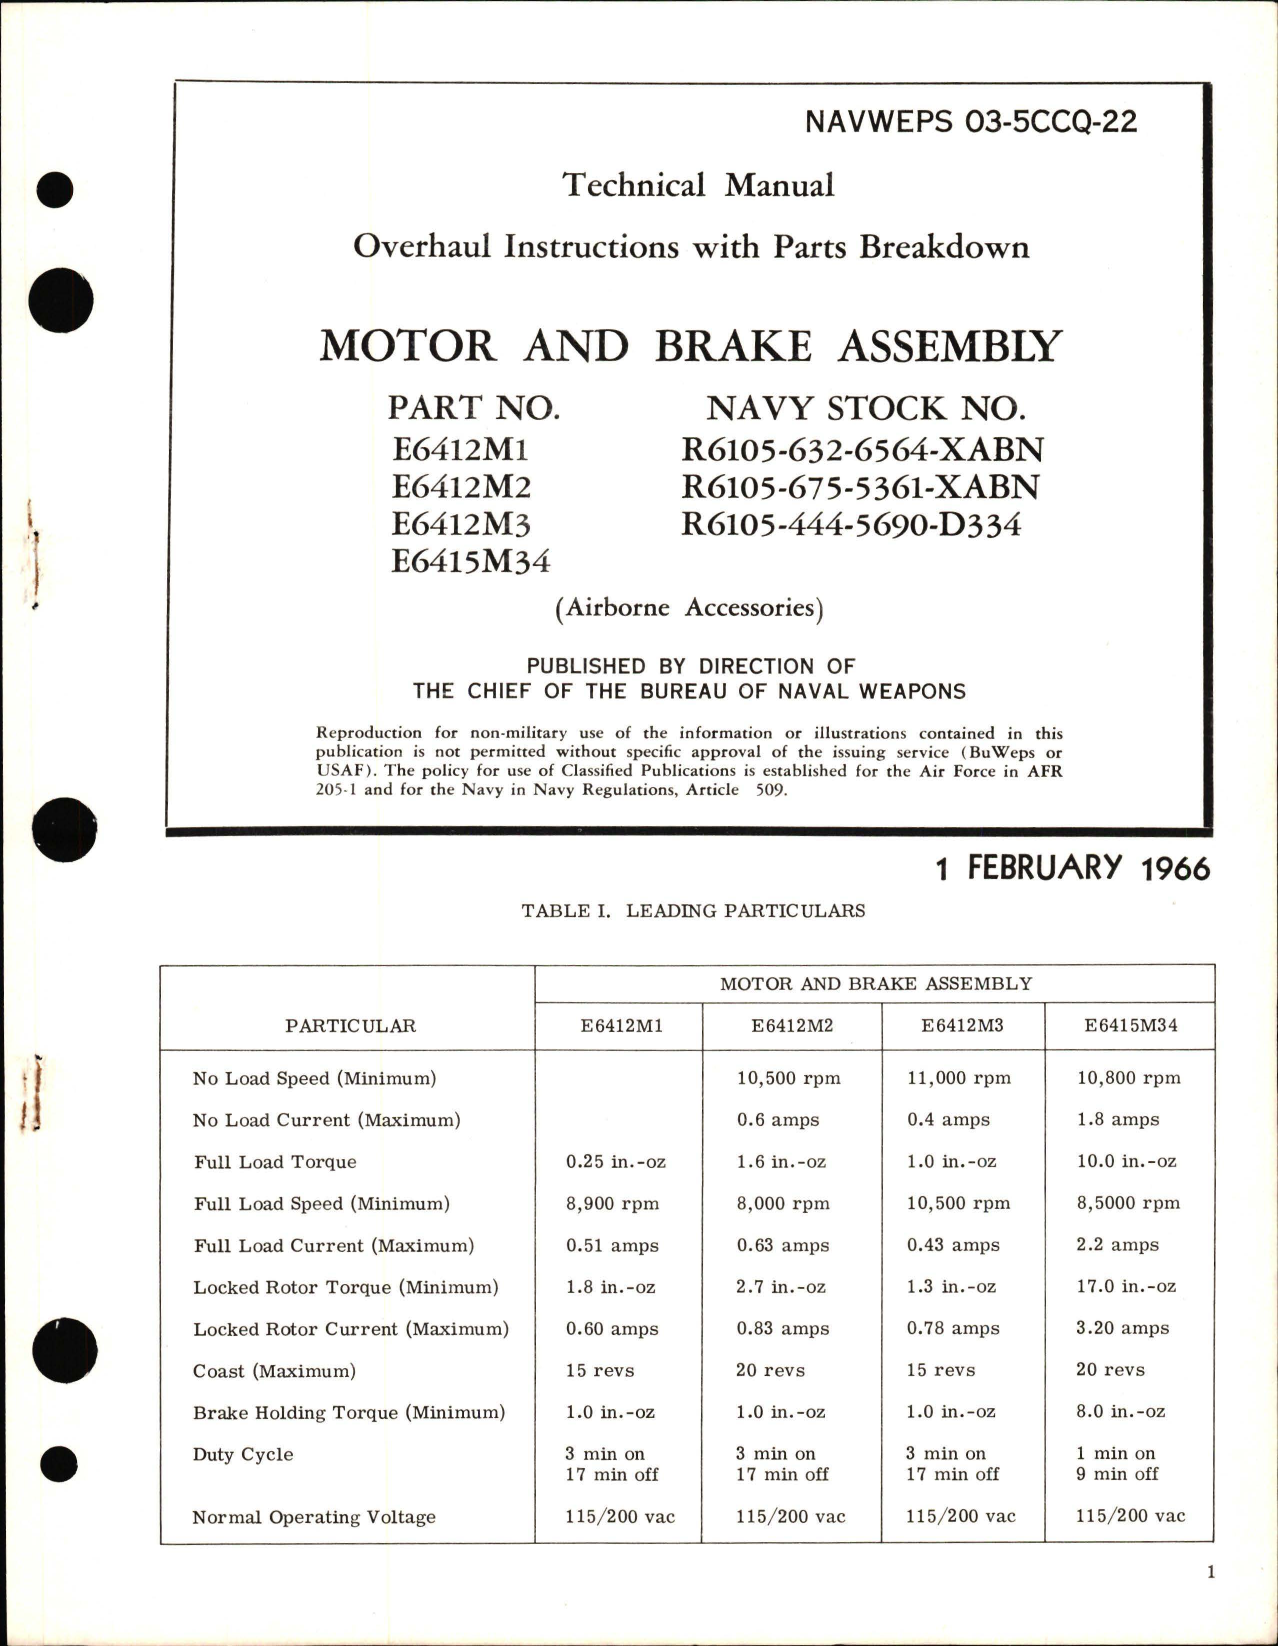 Sample page 1 from AirCorps Library document: Overhaul Instructions with Parts Breakdown for Motor and Brake Assembly - Part E6412M1, E6412M2, E6412M3 and E6415M34